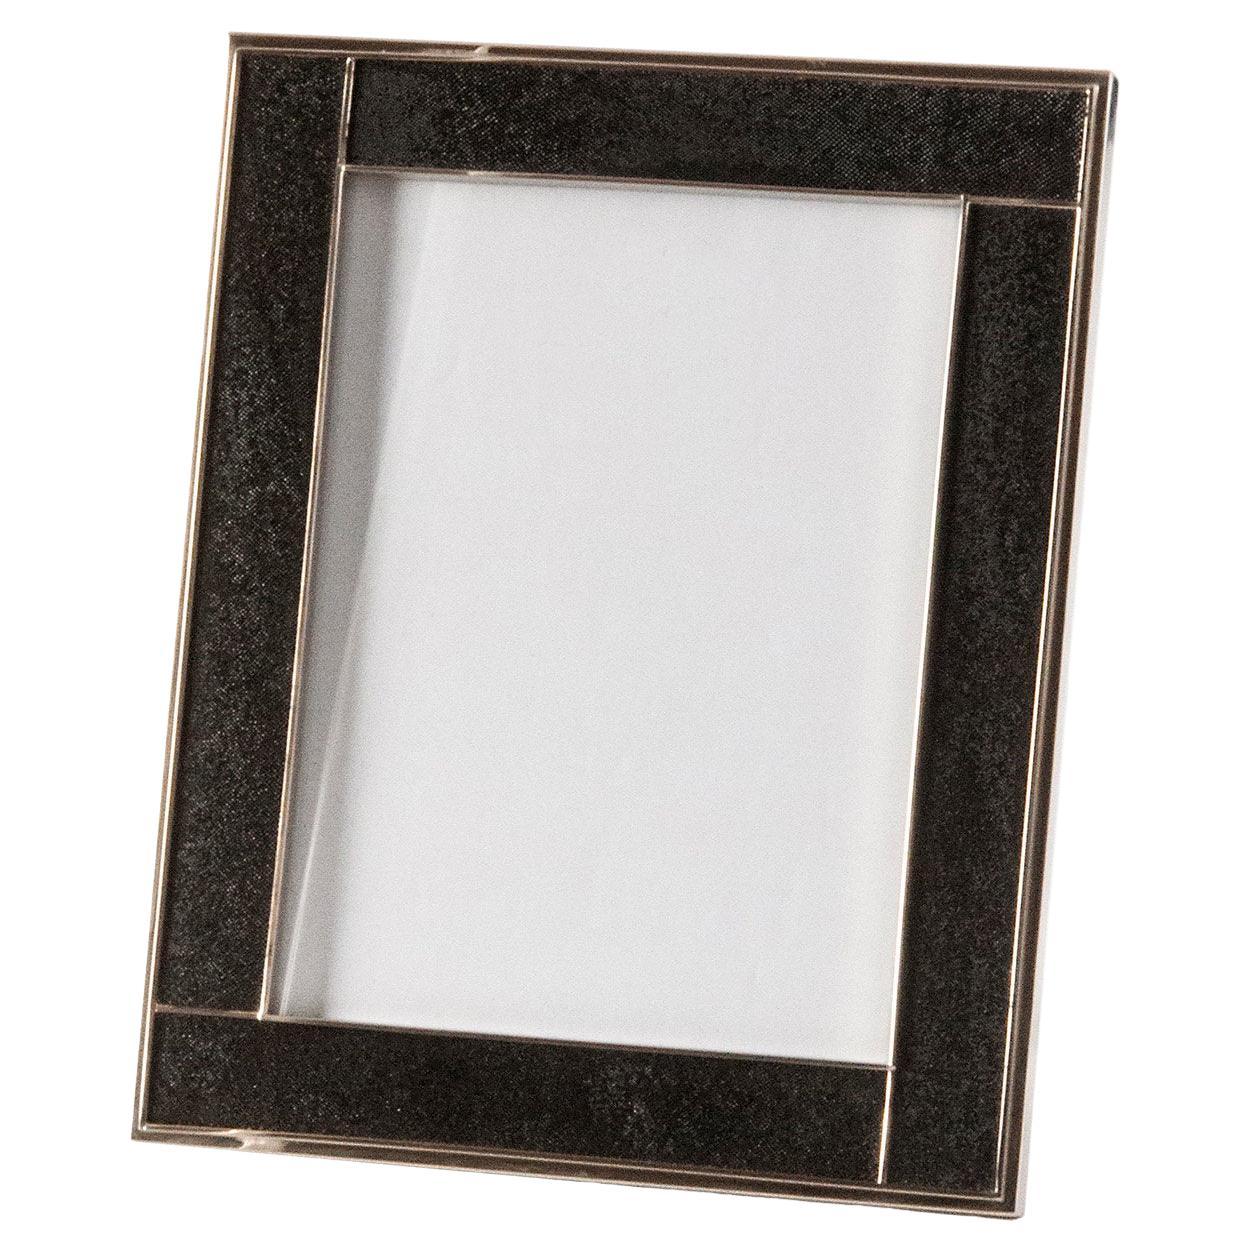 Galucharme Black Picture Frame by Nino Basso For Sale